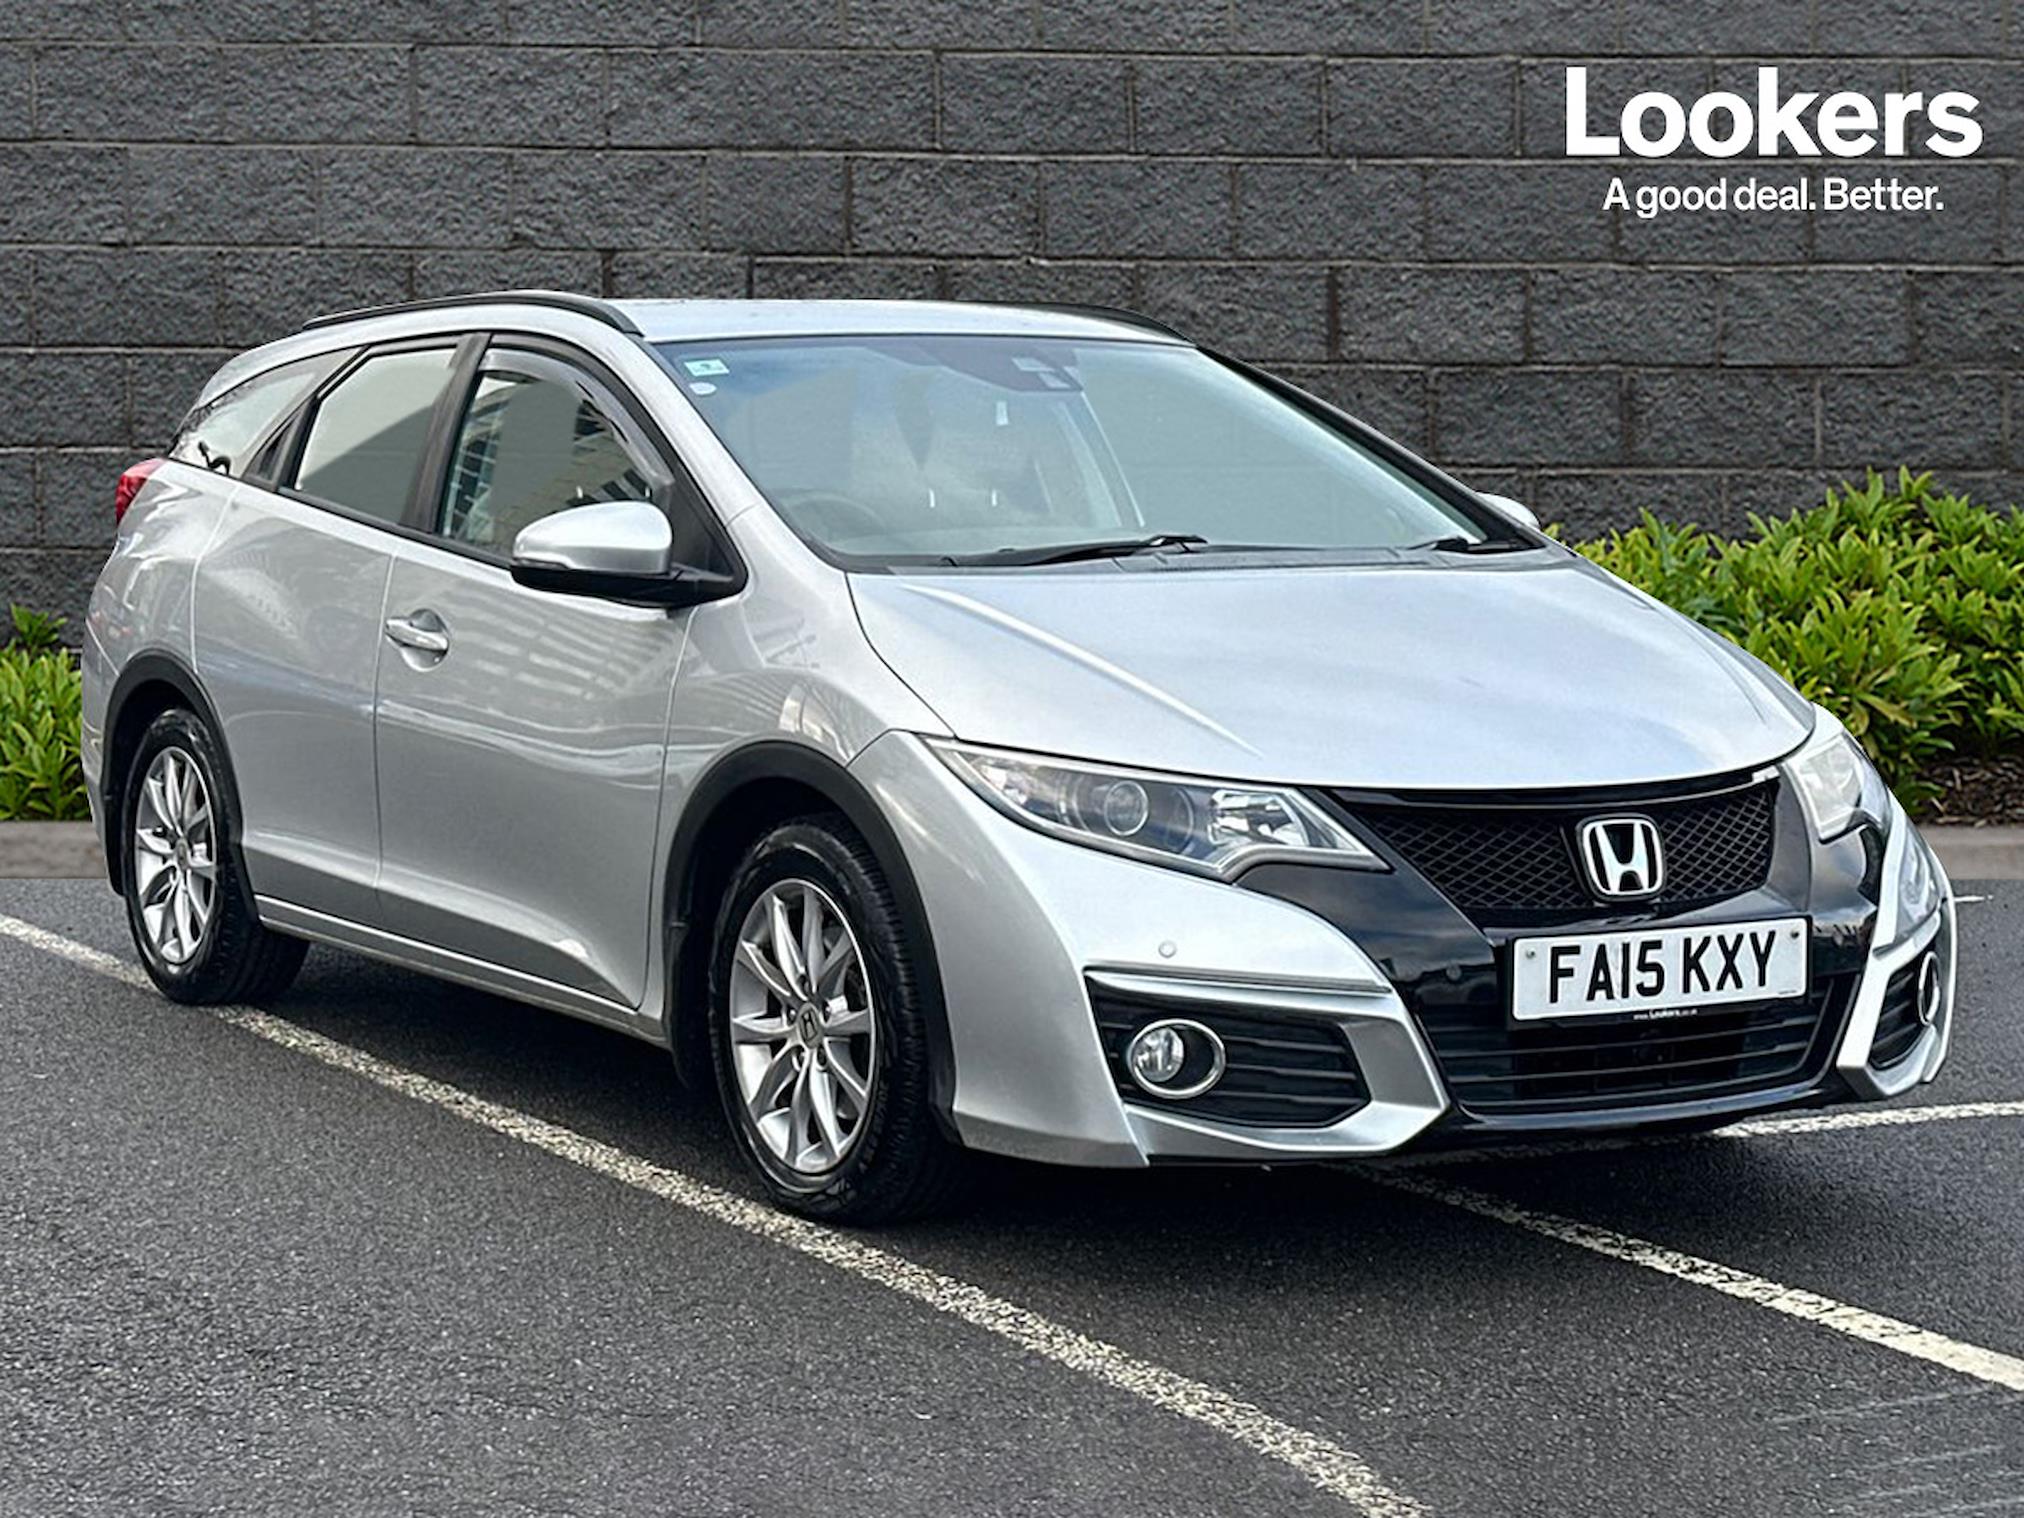 Used HONDA CIVIC 1.8 I-Vtec S 5Dr 2014 | Lookers